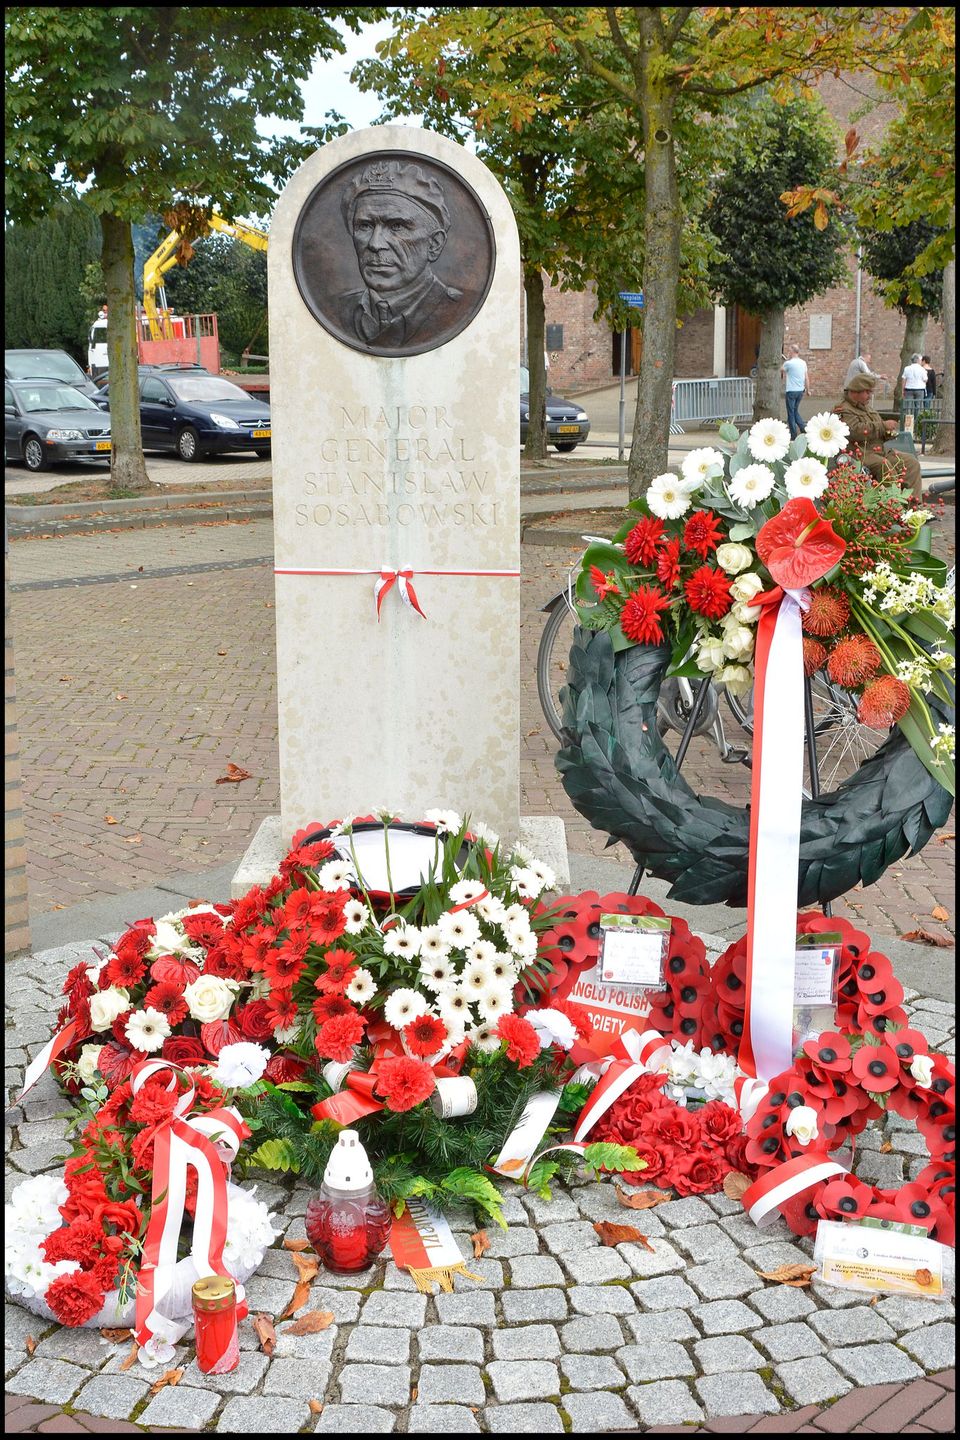 The Sosabowksi memorial unveiled in 2006 at the monument in Driel.